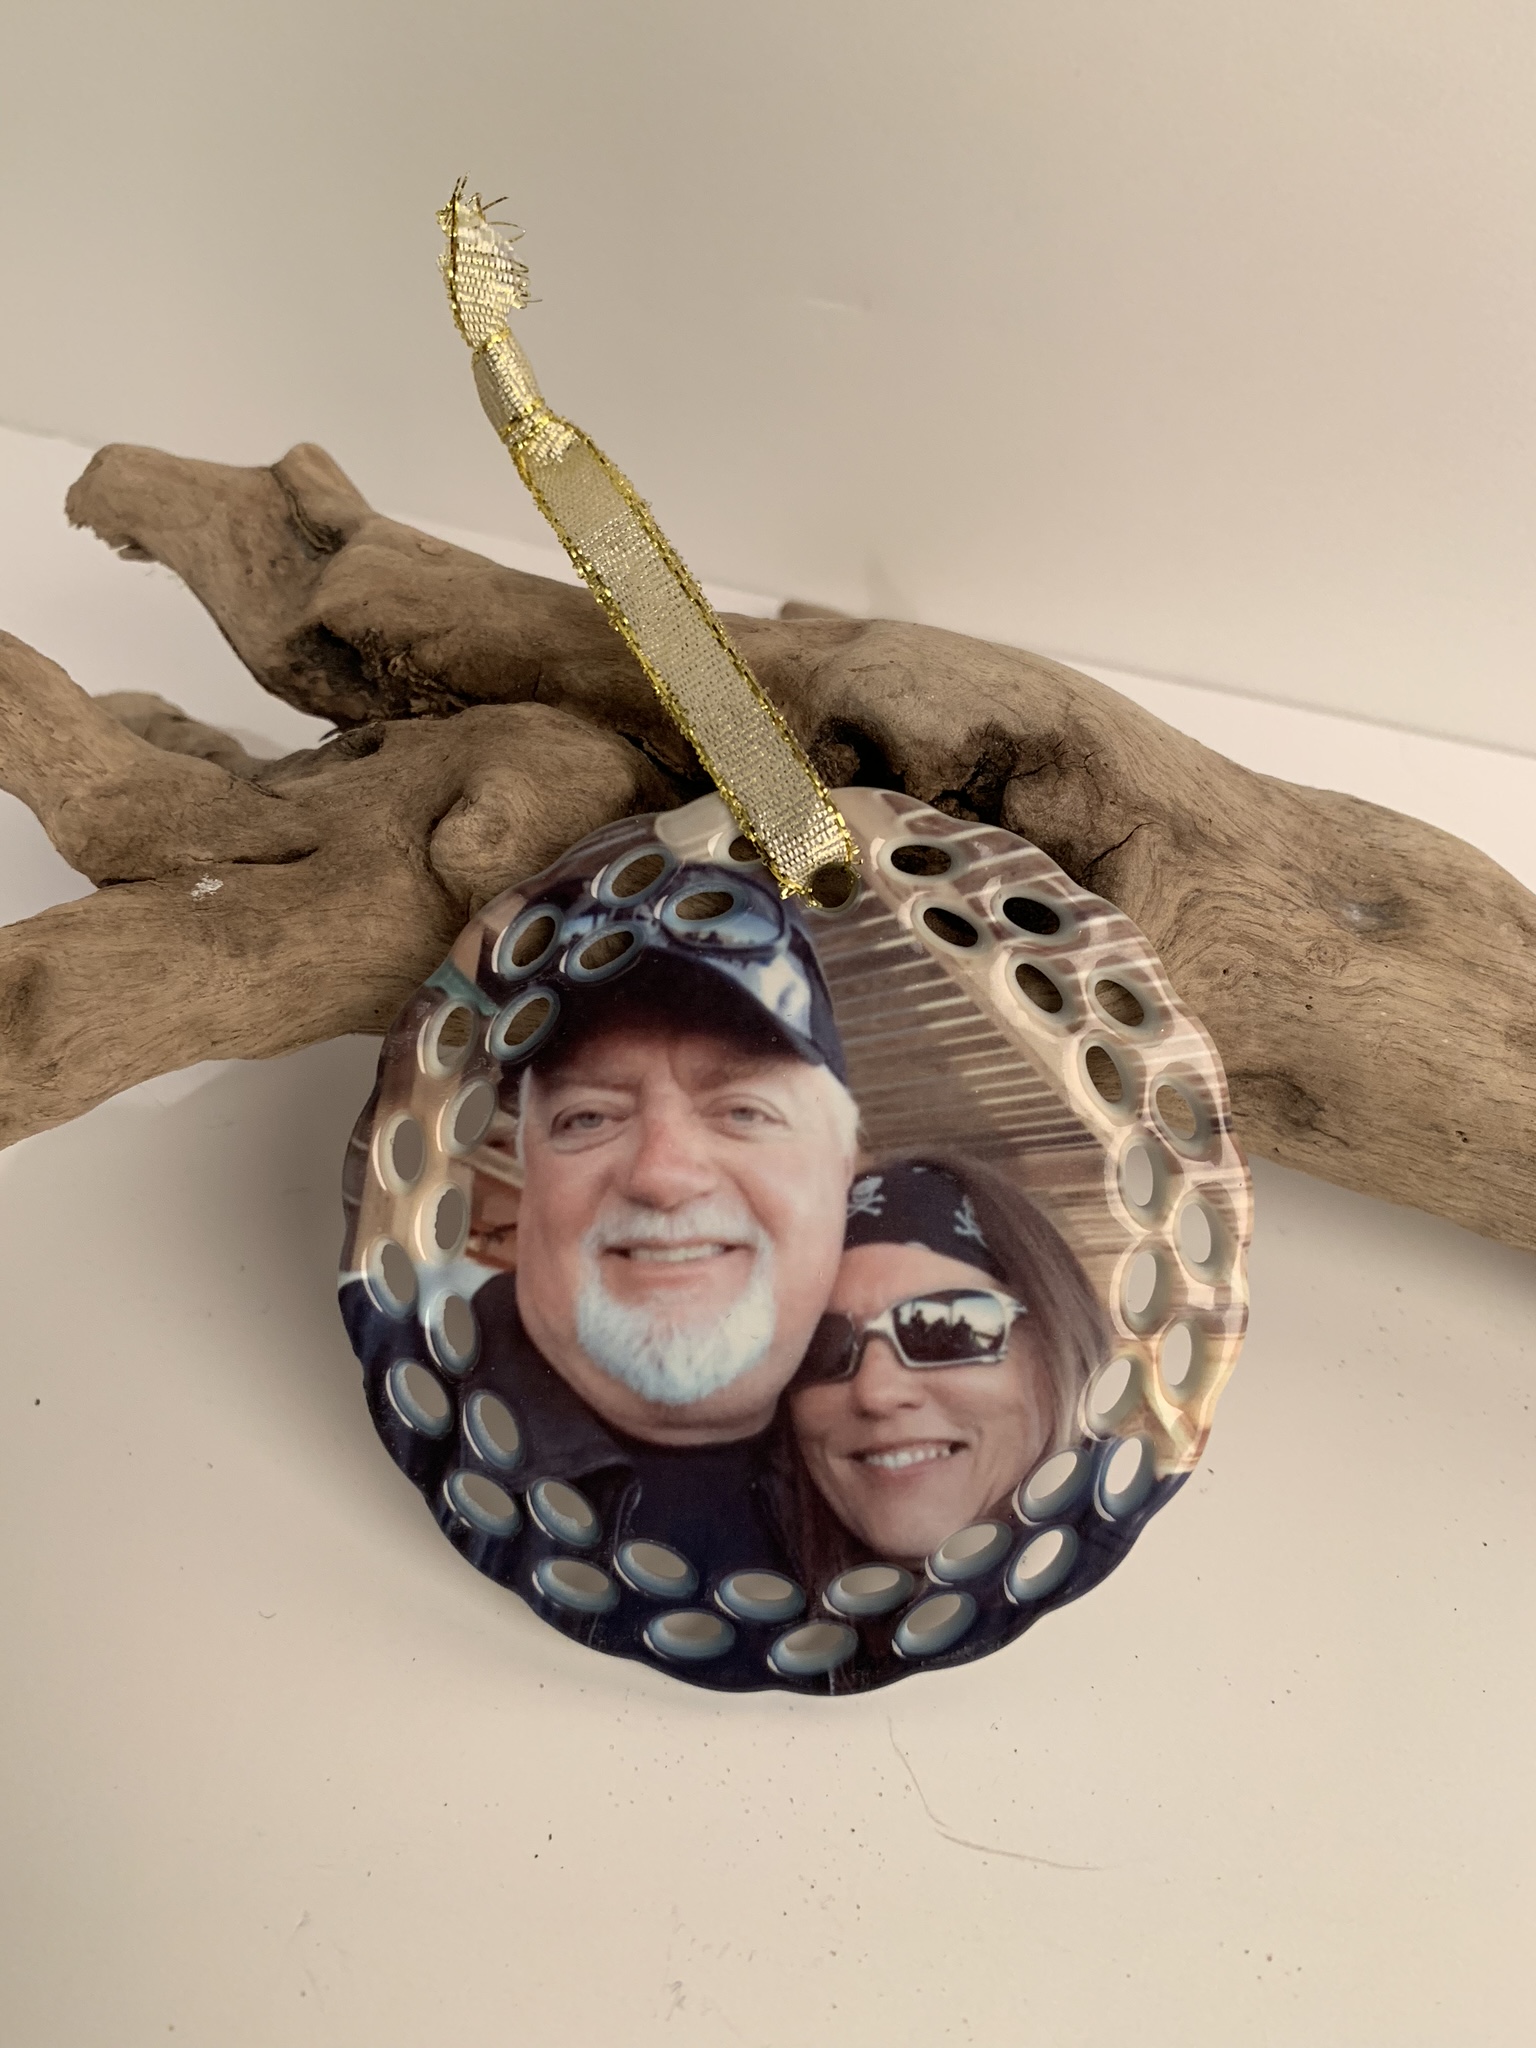 Jay and Lona made with sublimation printing